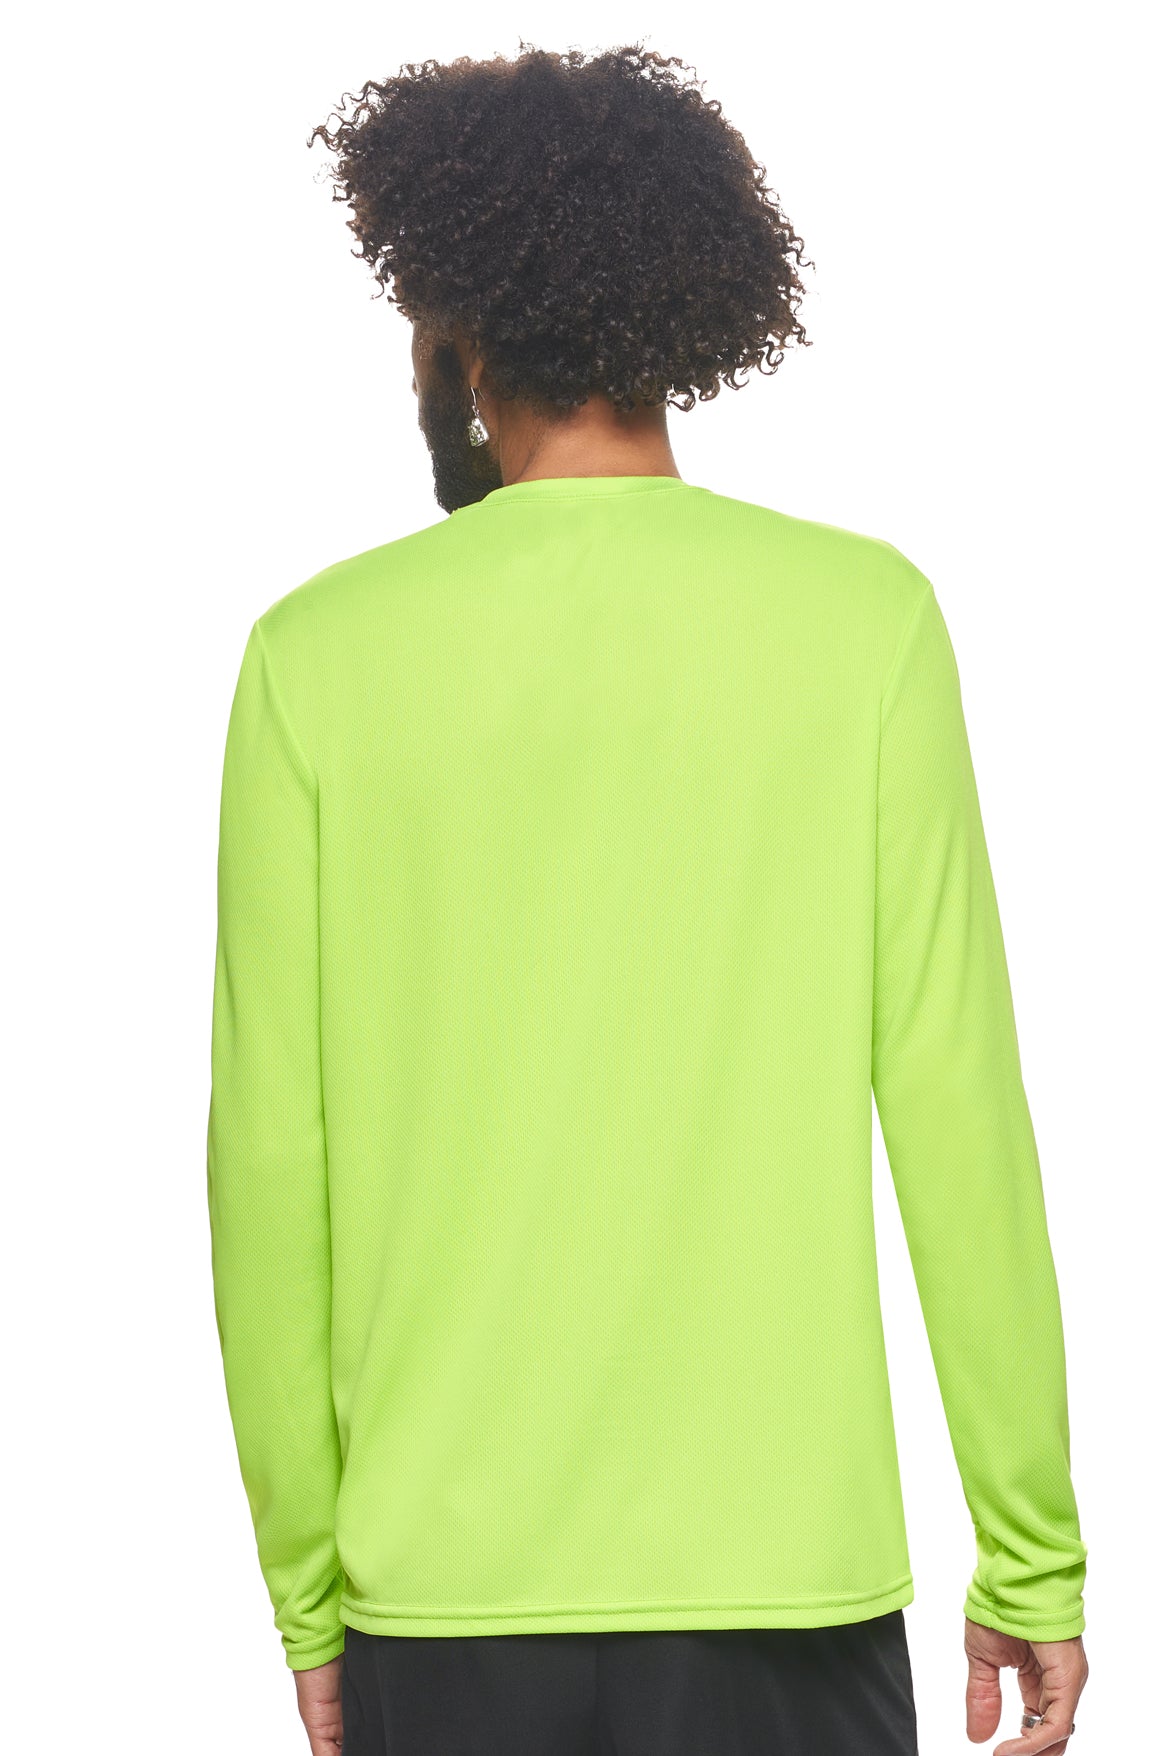 Expert Brand Retail Made in USA sportswear activewear long sleeve tec tee oxymesh crewneck key lime 3#color_key-lime